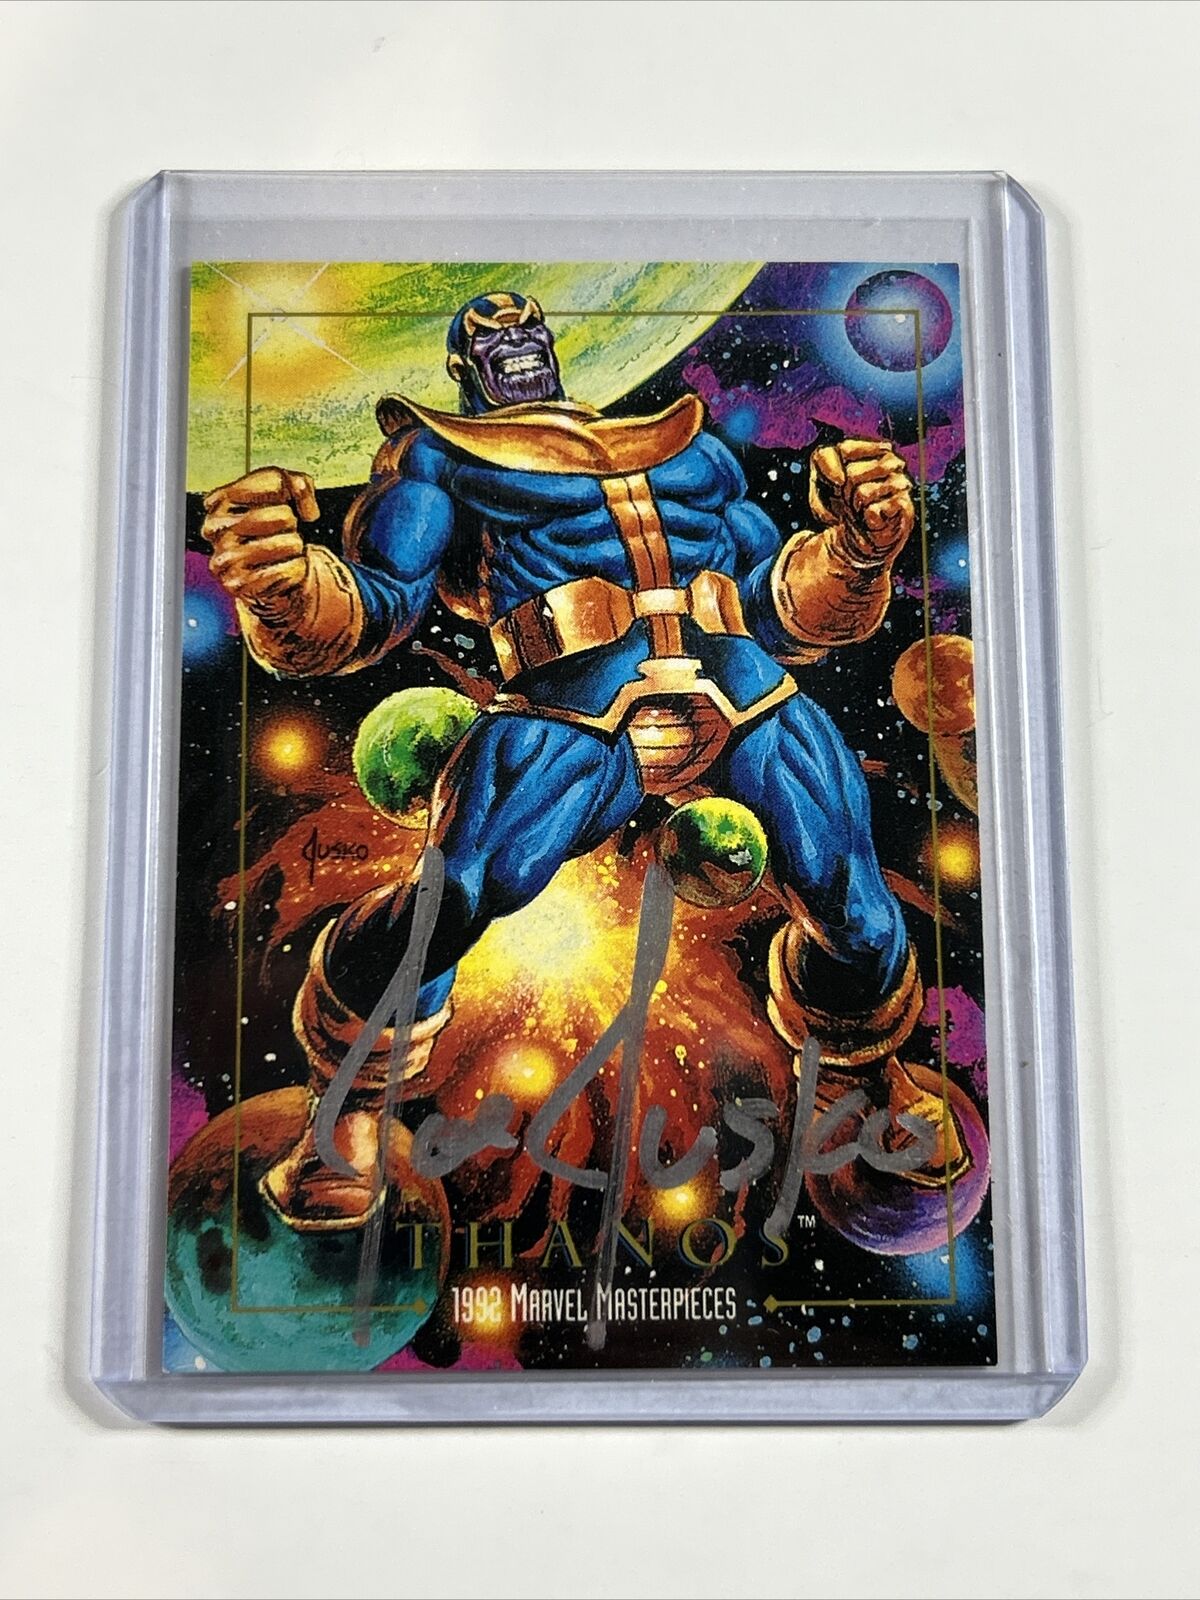 THANOS #83 Skybox 1992 Marvel Masterpieces Card Signed by JOE JUSKO